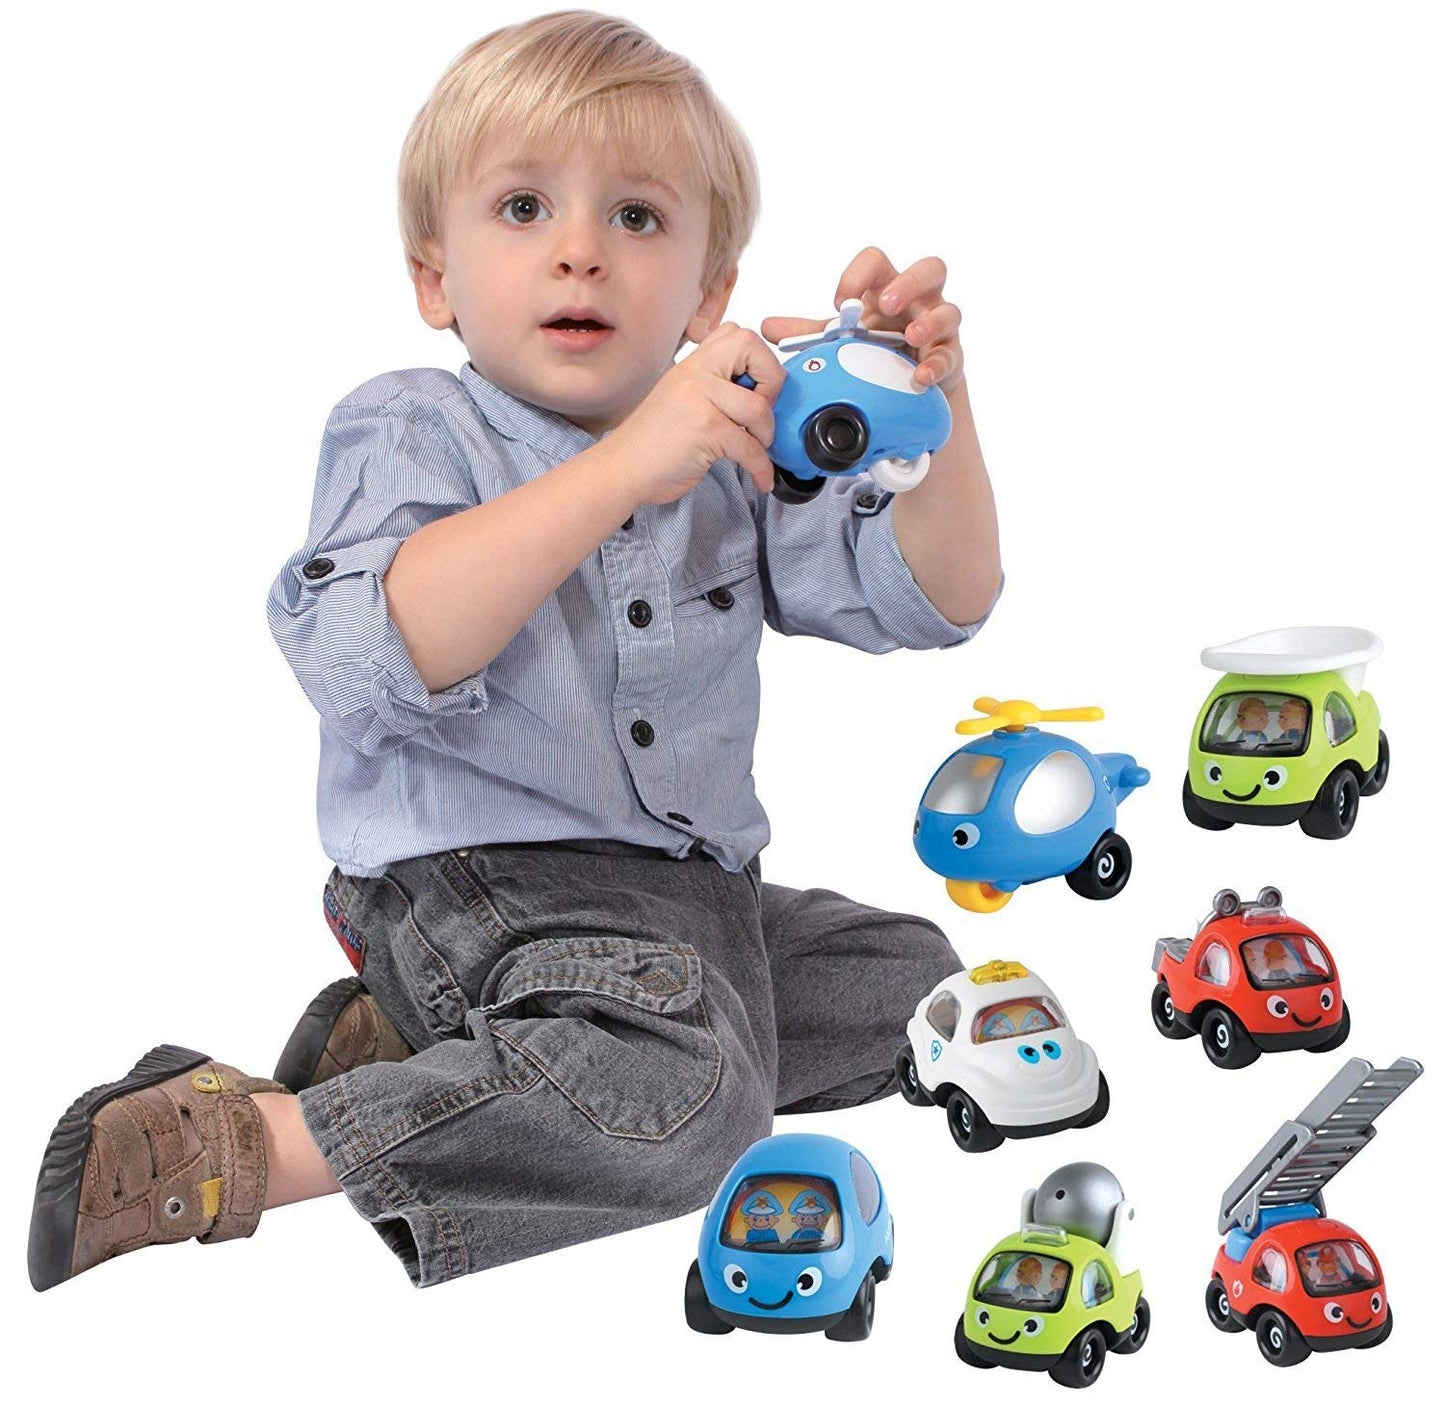 Cartoon Cars and Trucks Play Vehicles Set for Toddlers (6-Pack)